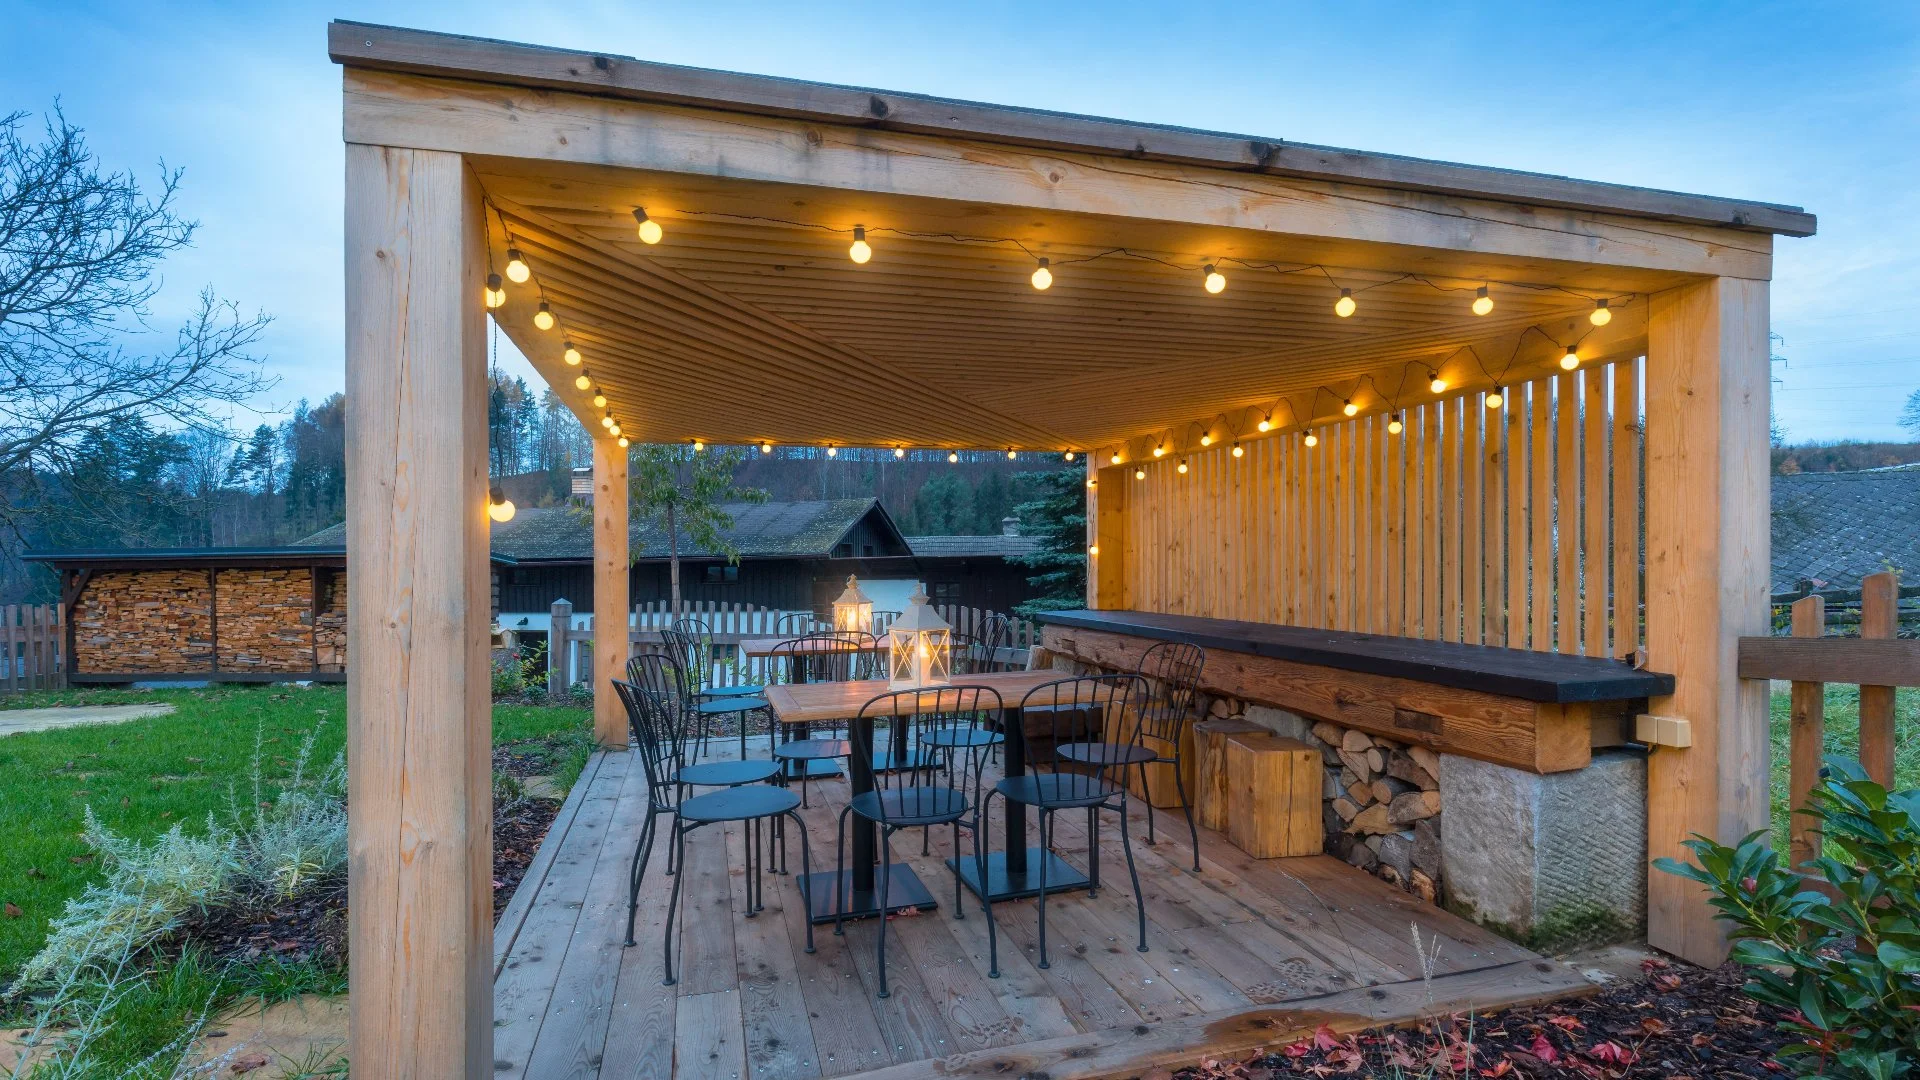 Want to Add a Pergola, Pavilion or Gazebo to Your Property in Omaha, NE? Consider These Differences!